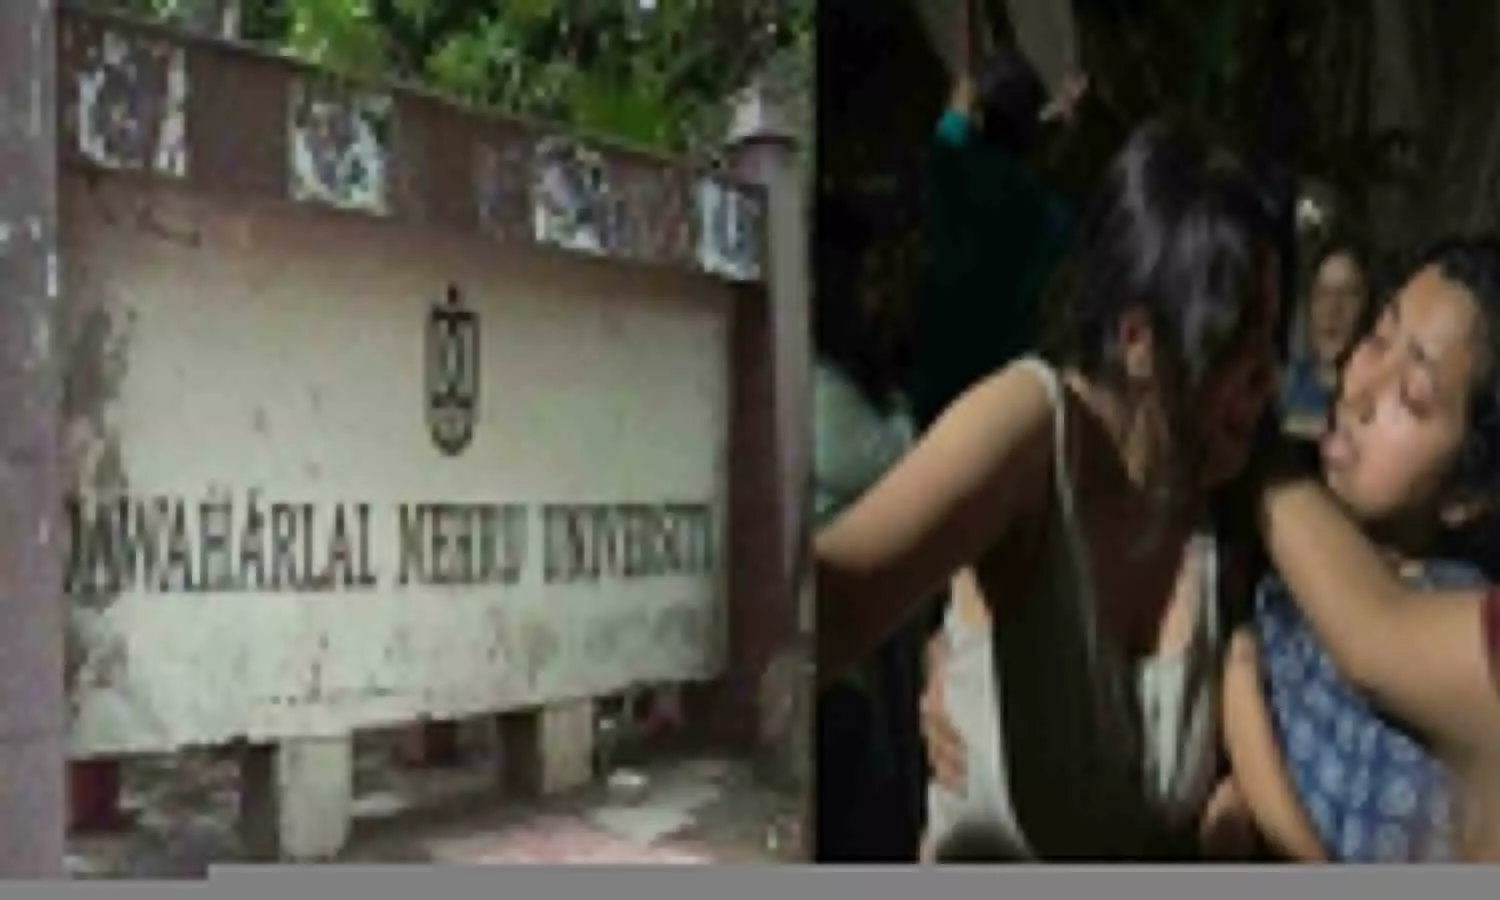 JNU administration warns students, refrain from any kind of violence or else strict action will be taken